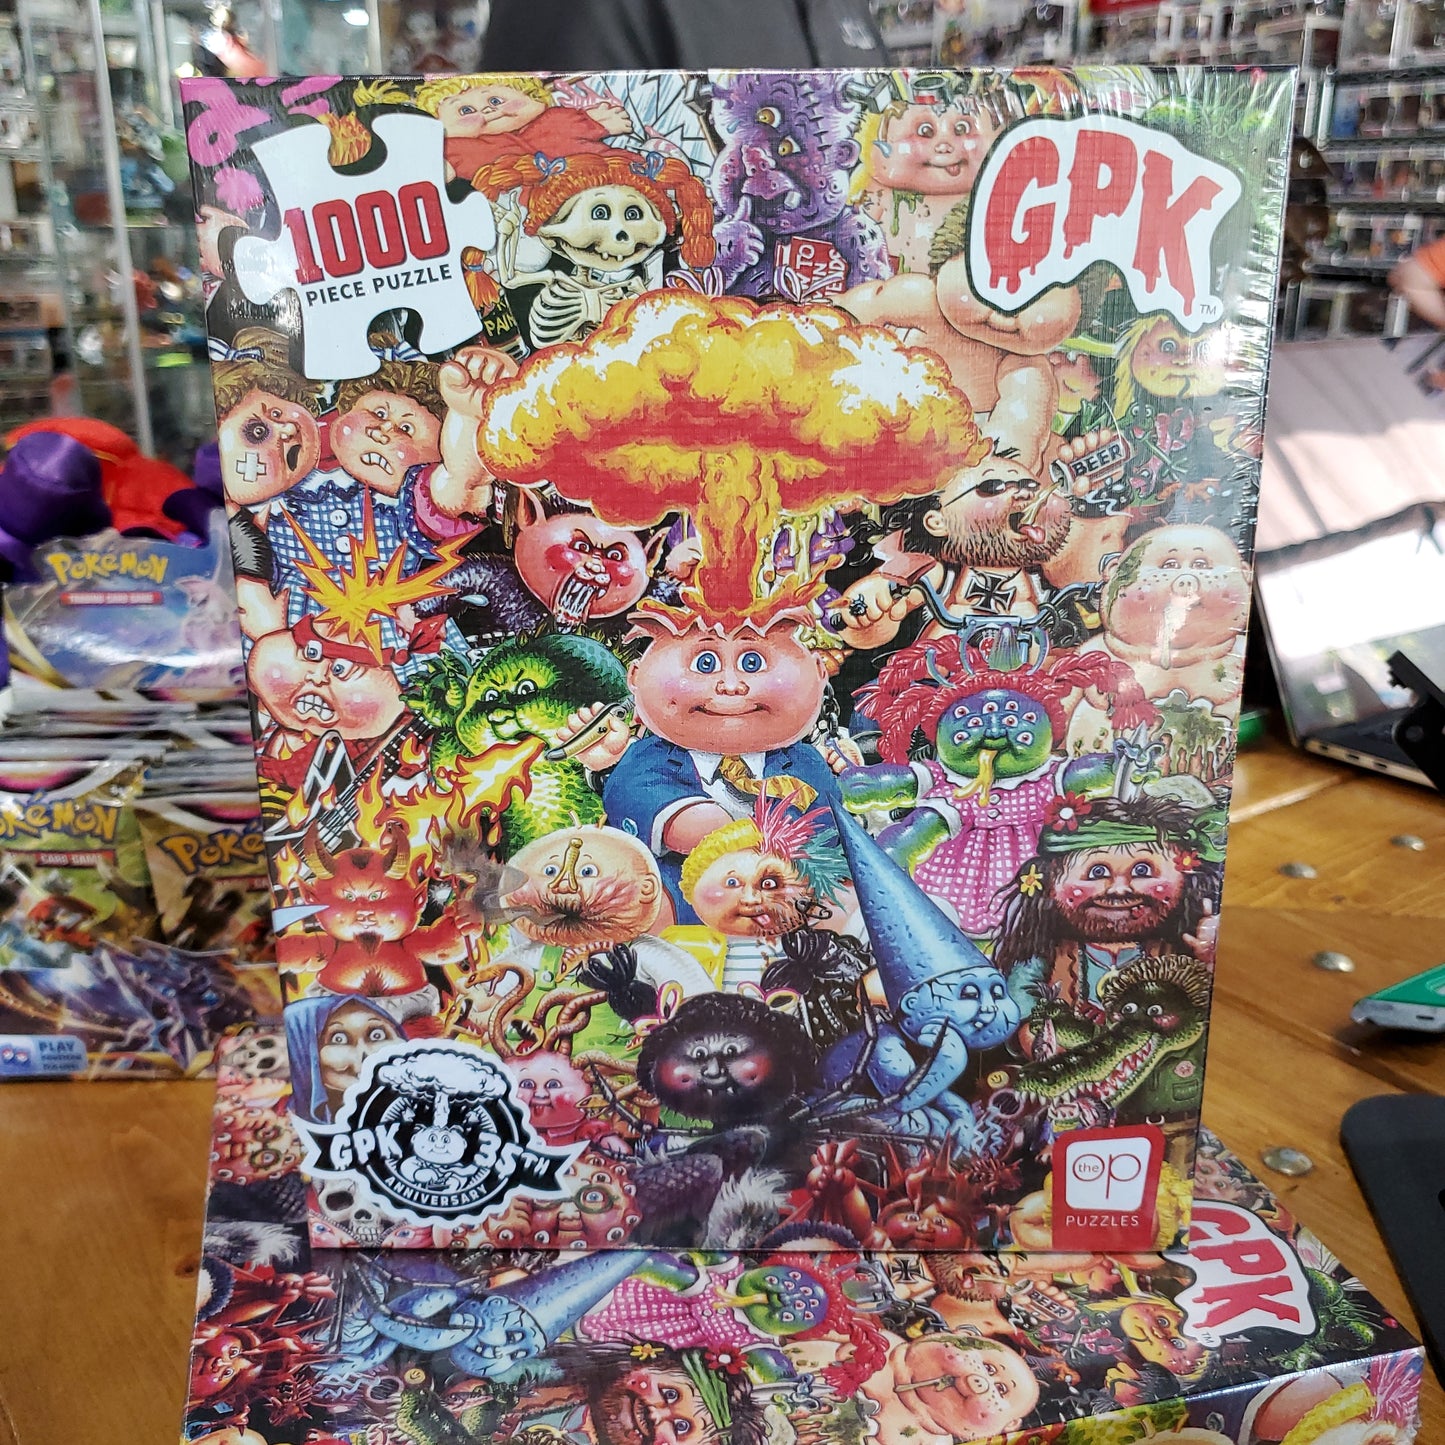 GPK - Yuck! - 1000 Piece Puzzle by The OP Puzzles